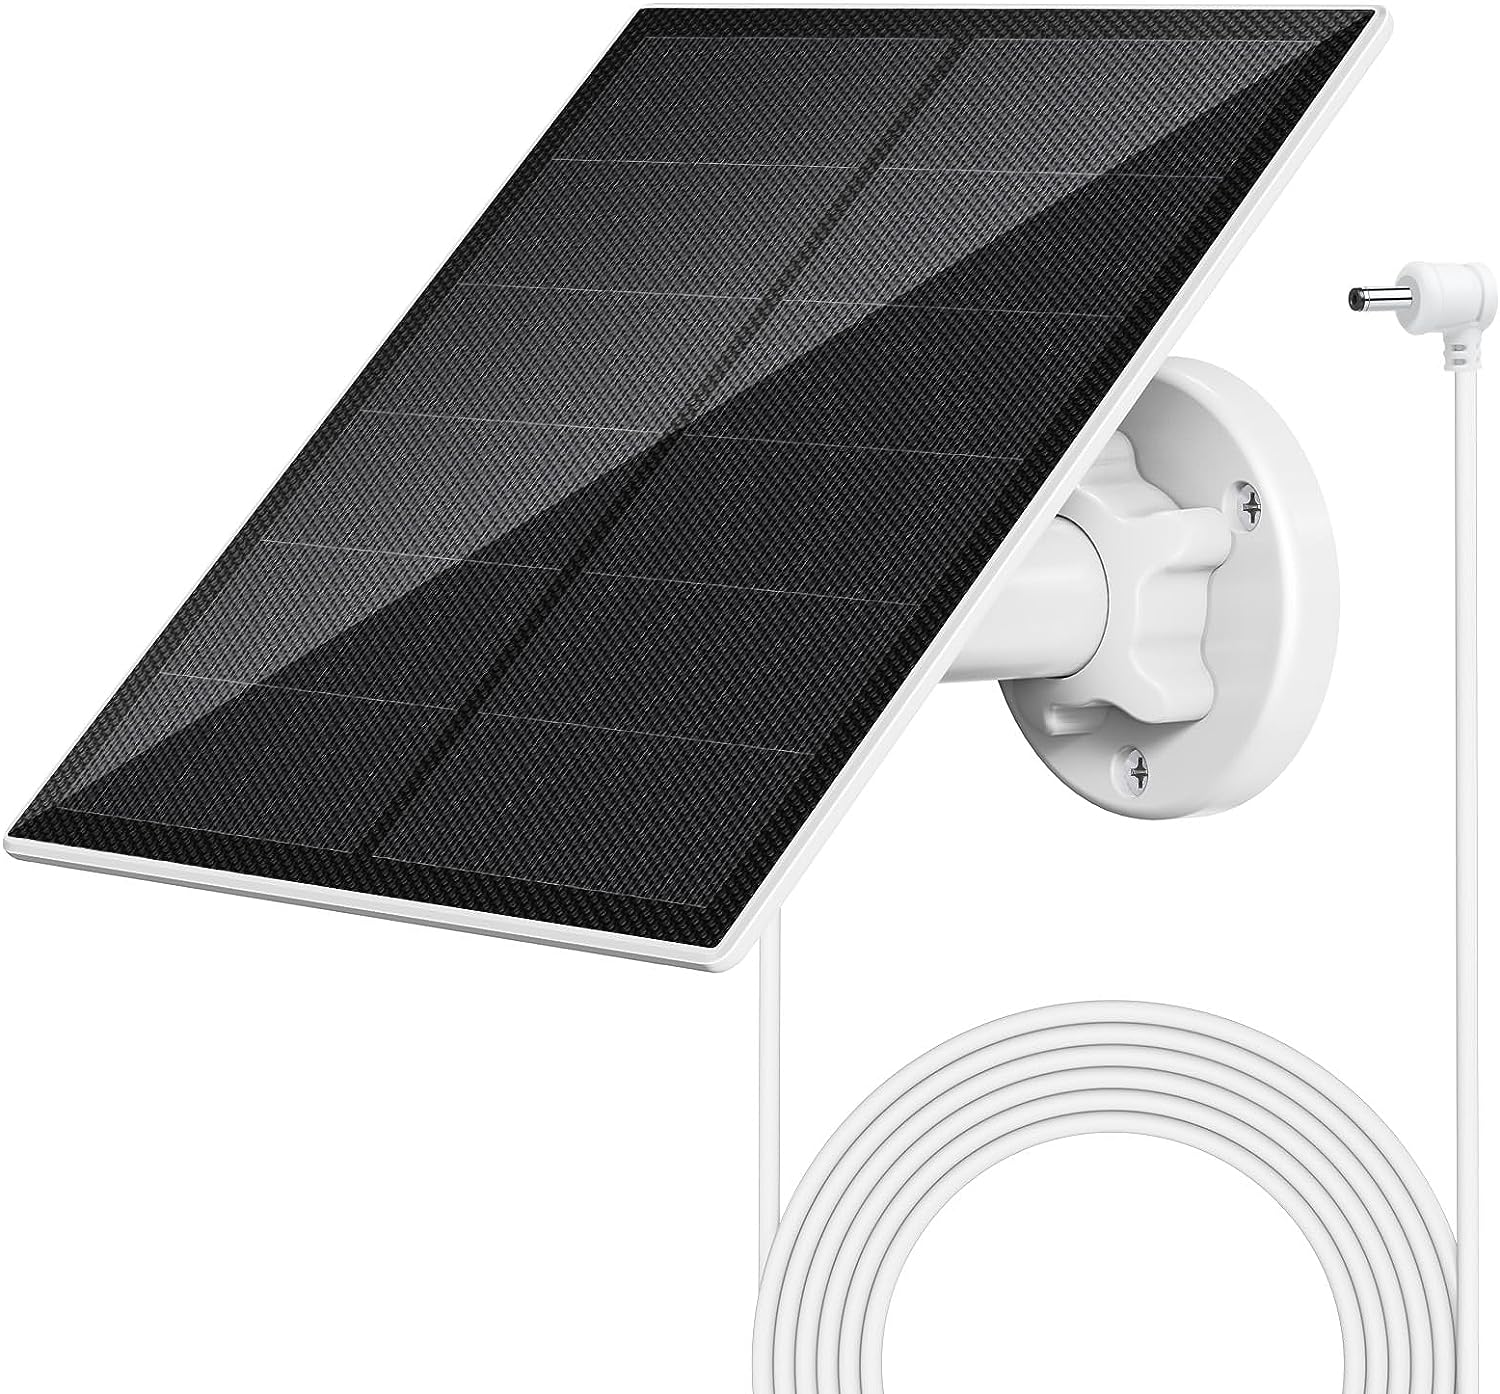 Best Ring Camera Solar Panel Review